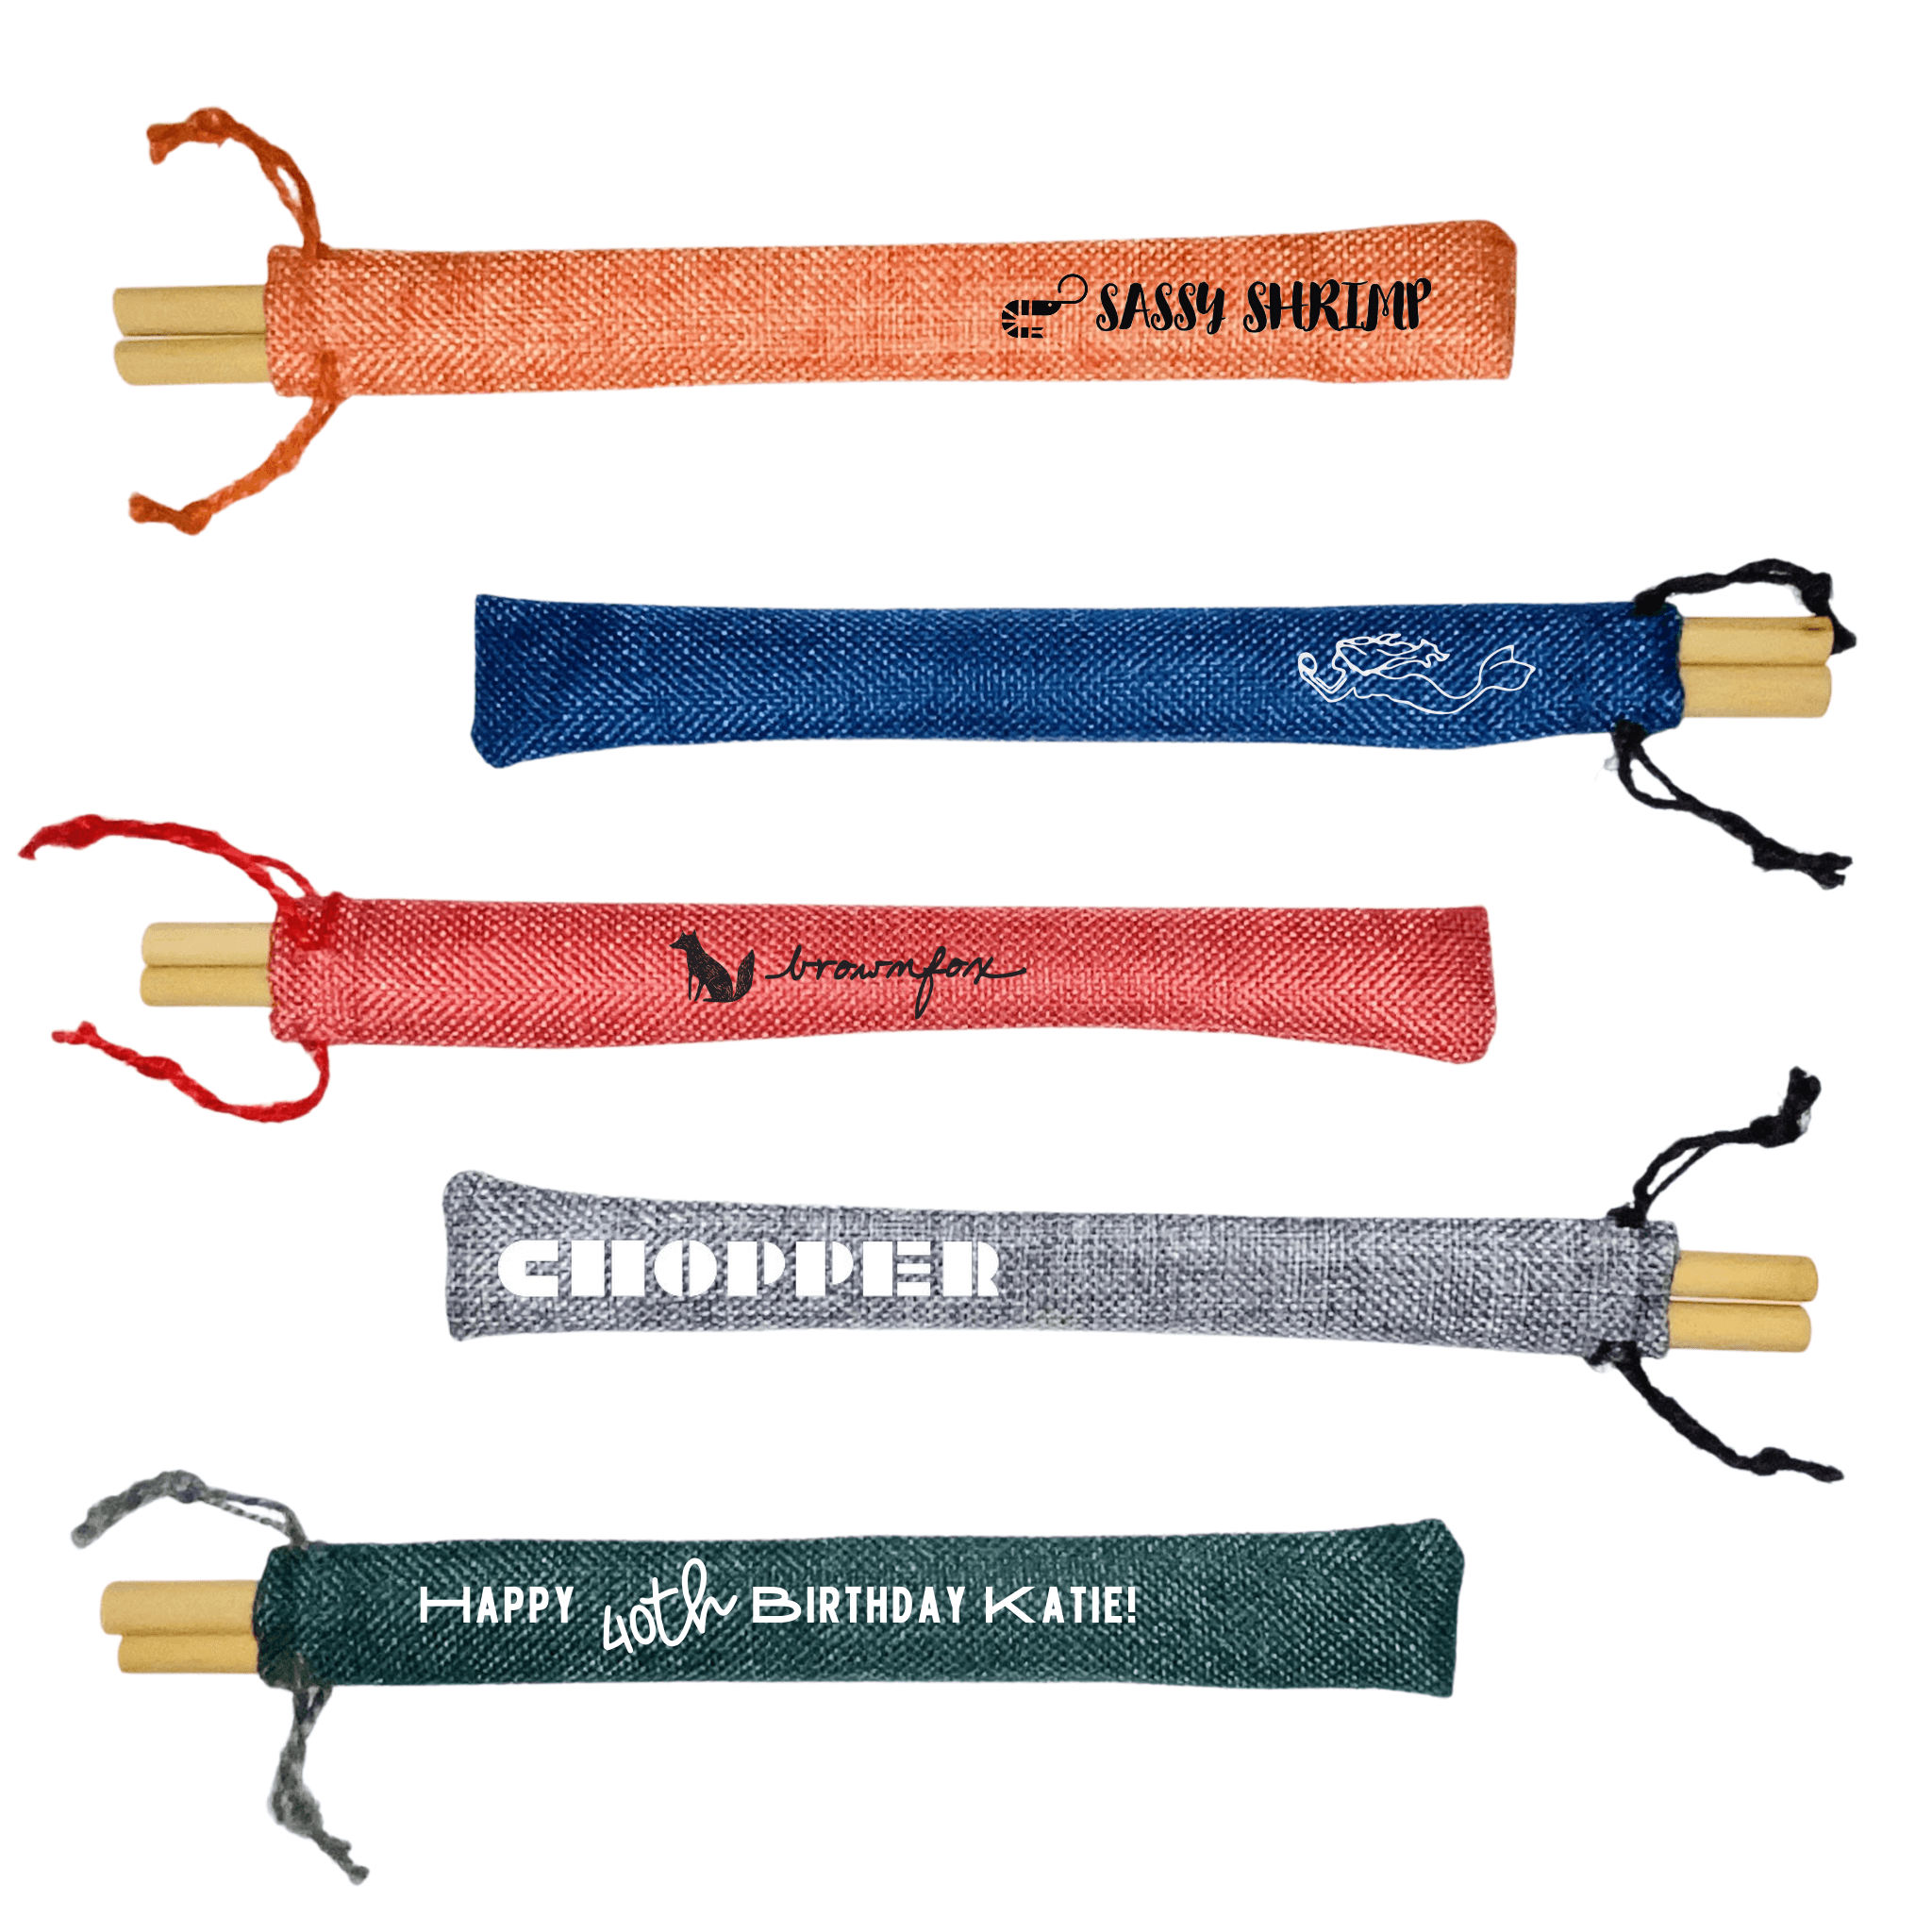 Dark colored versions of the Holy City Straw Company two straw branded pouch combos options